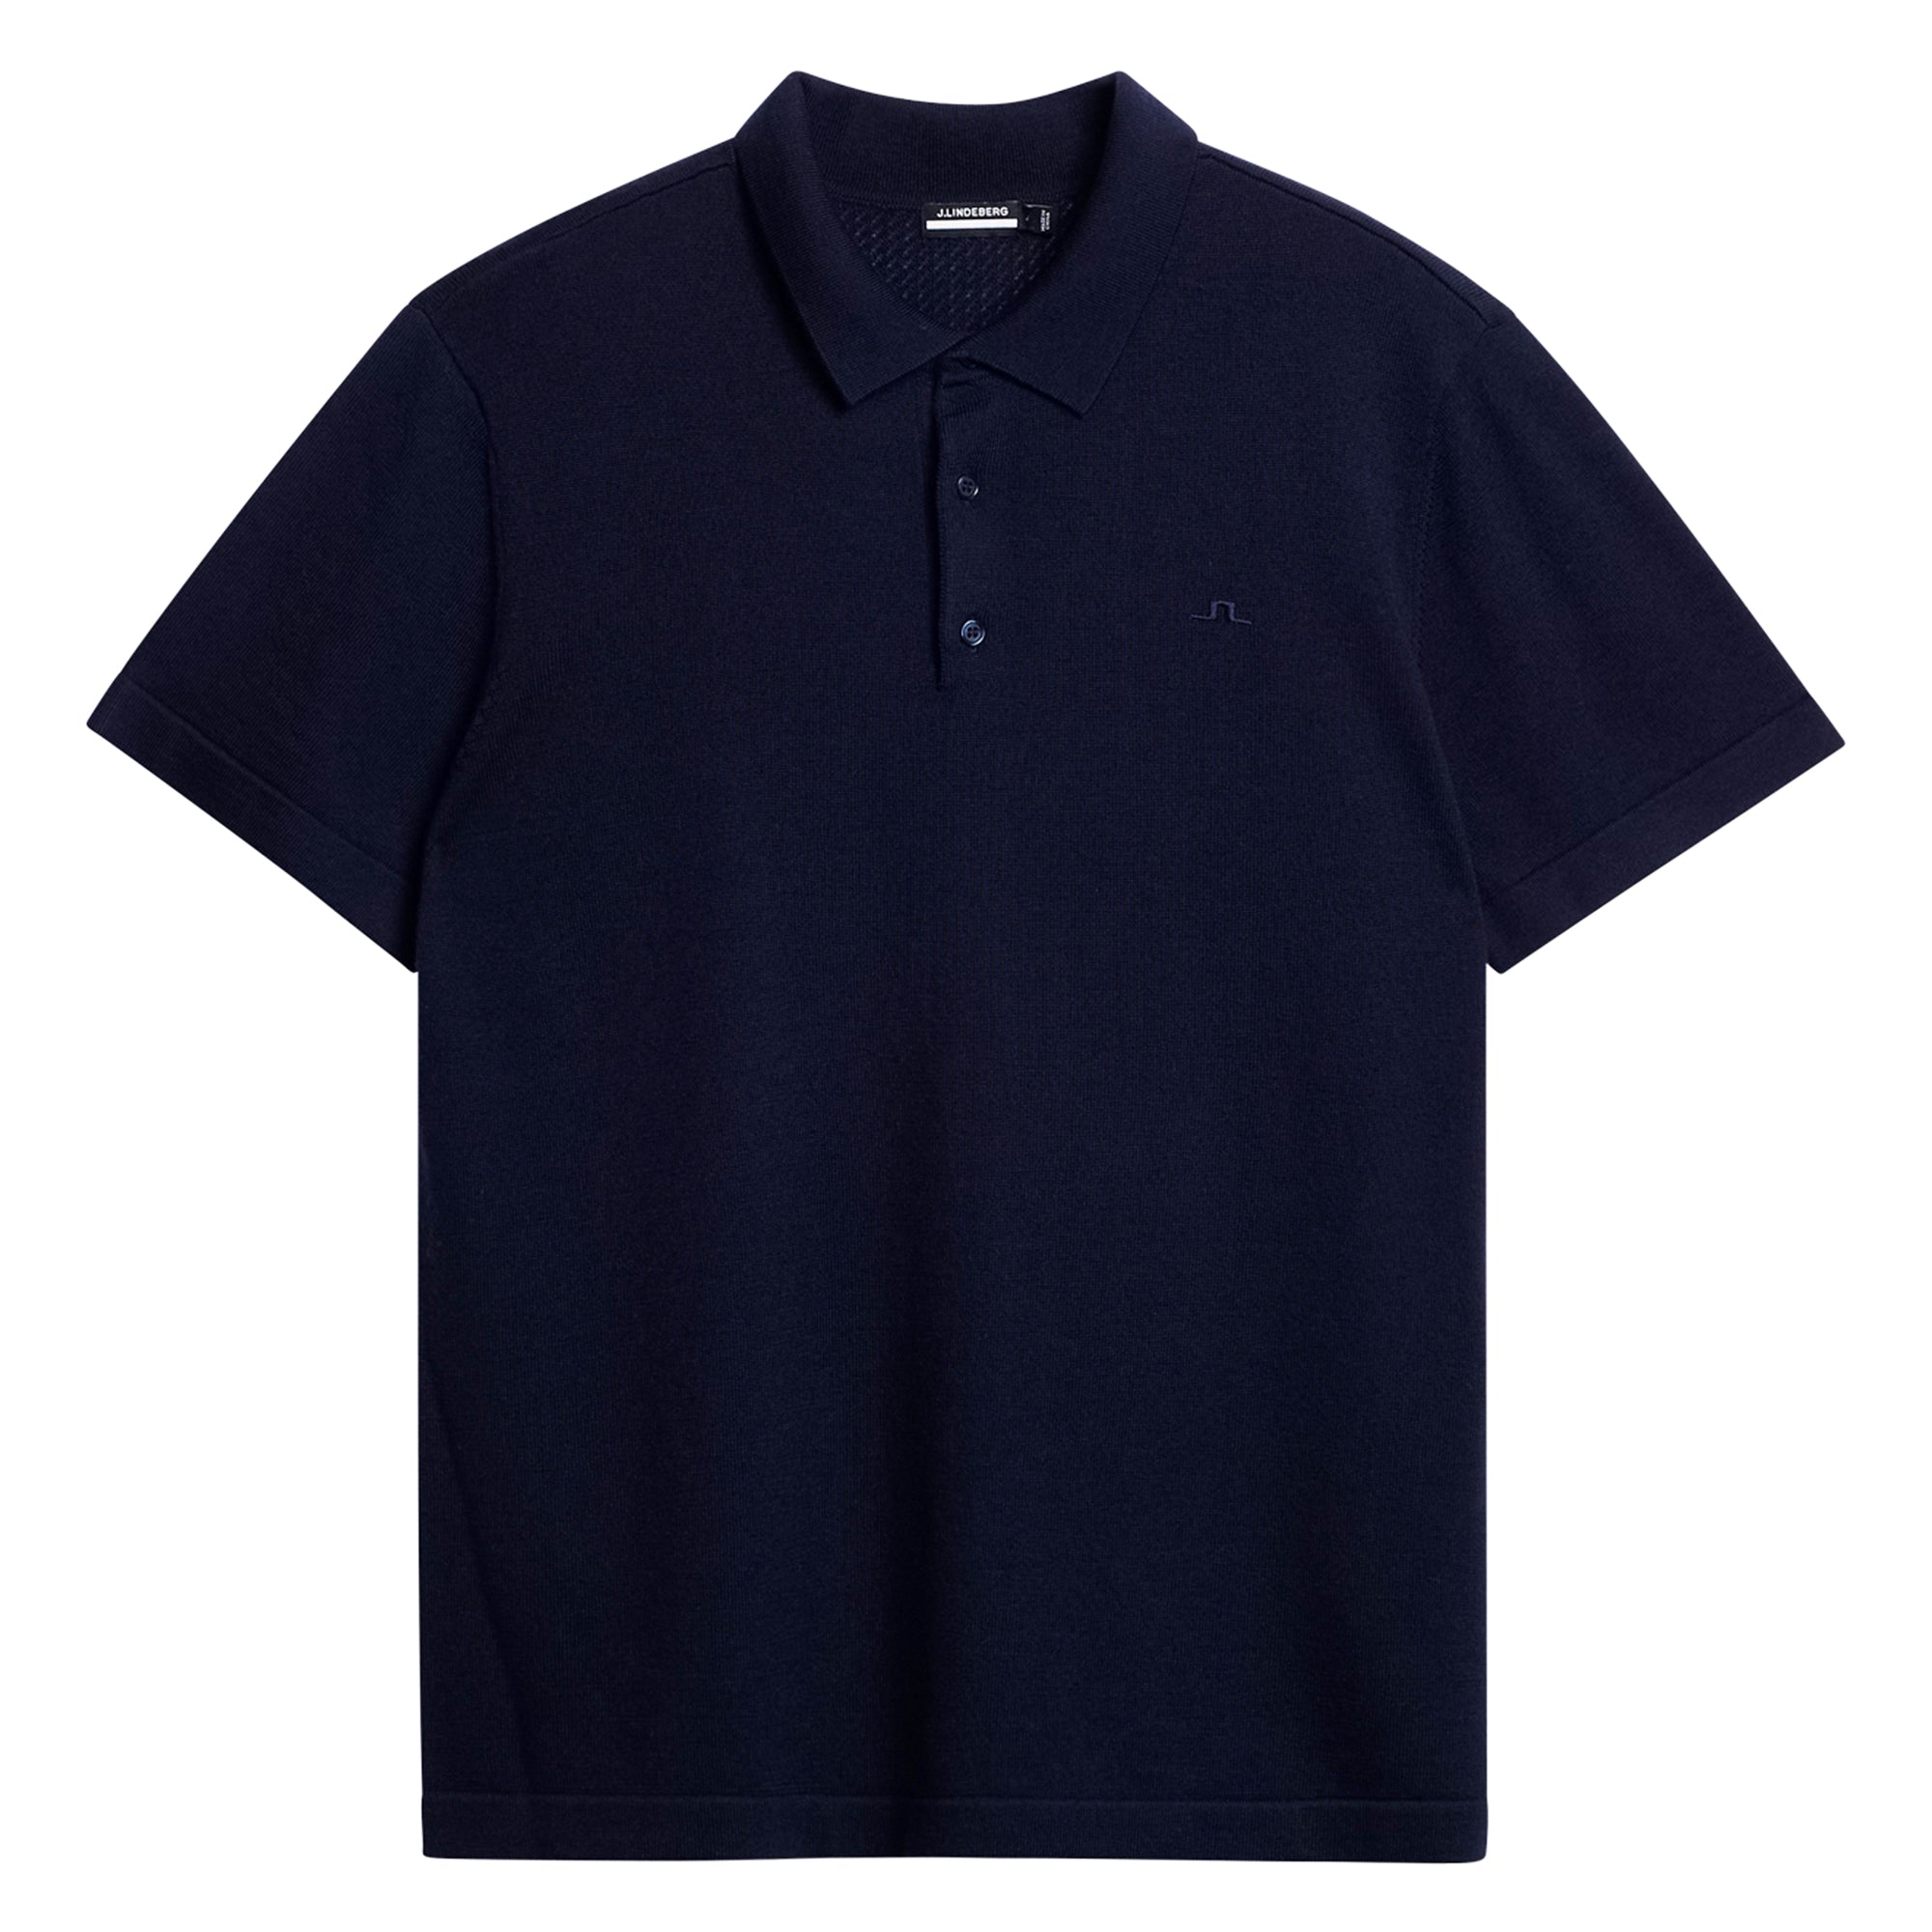 j-lindeberg-golf-lear-knitted-polo-shirt-ss24-gmkw09635-6855-jl-navy